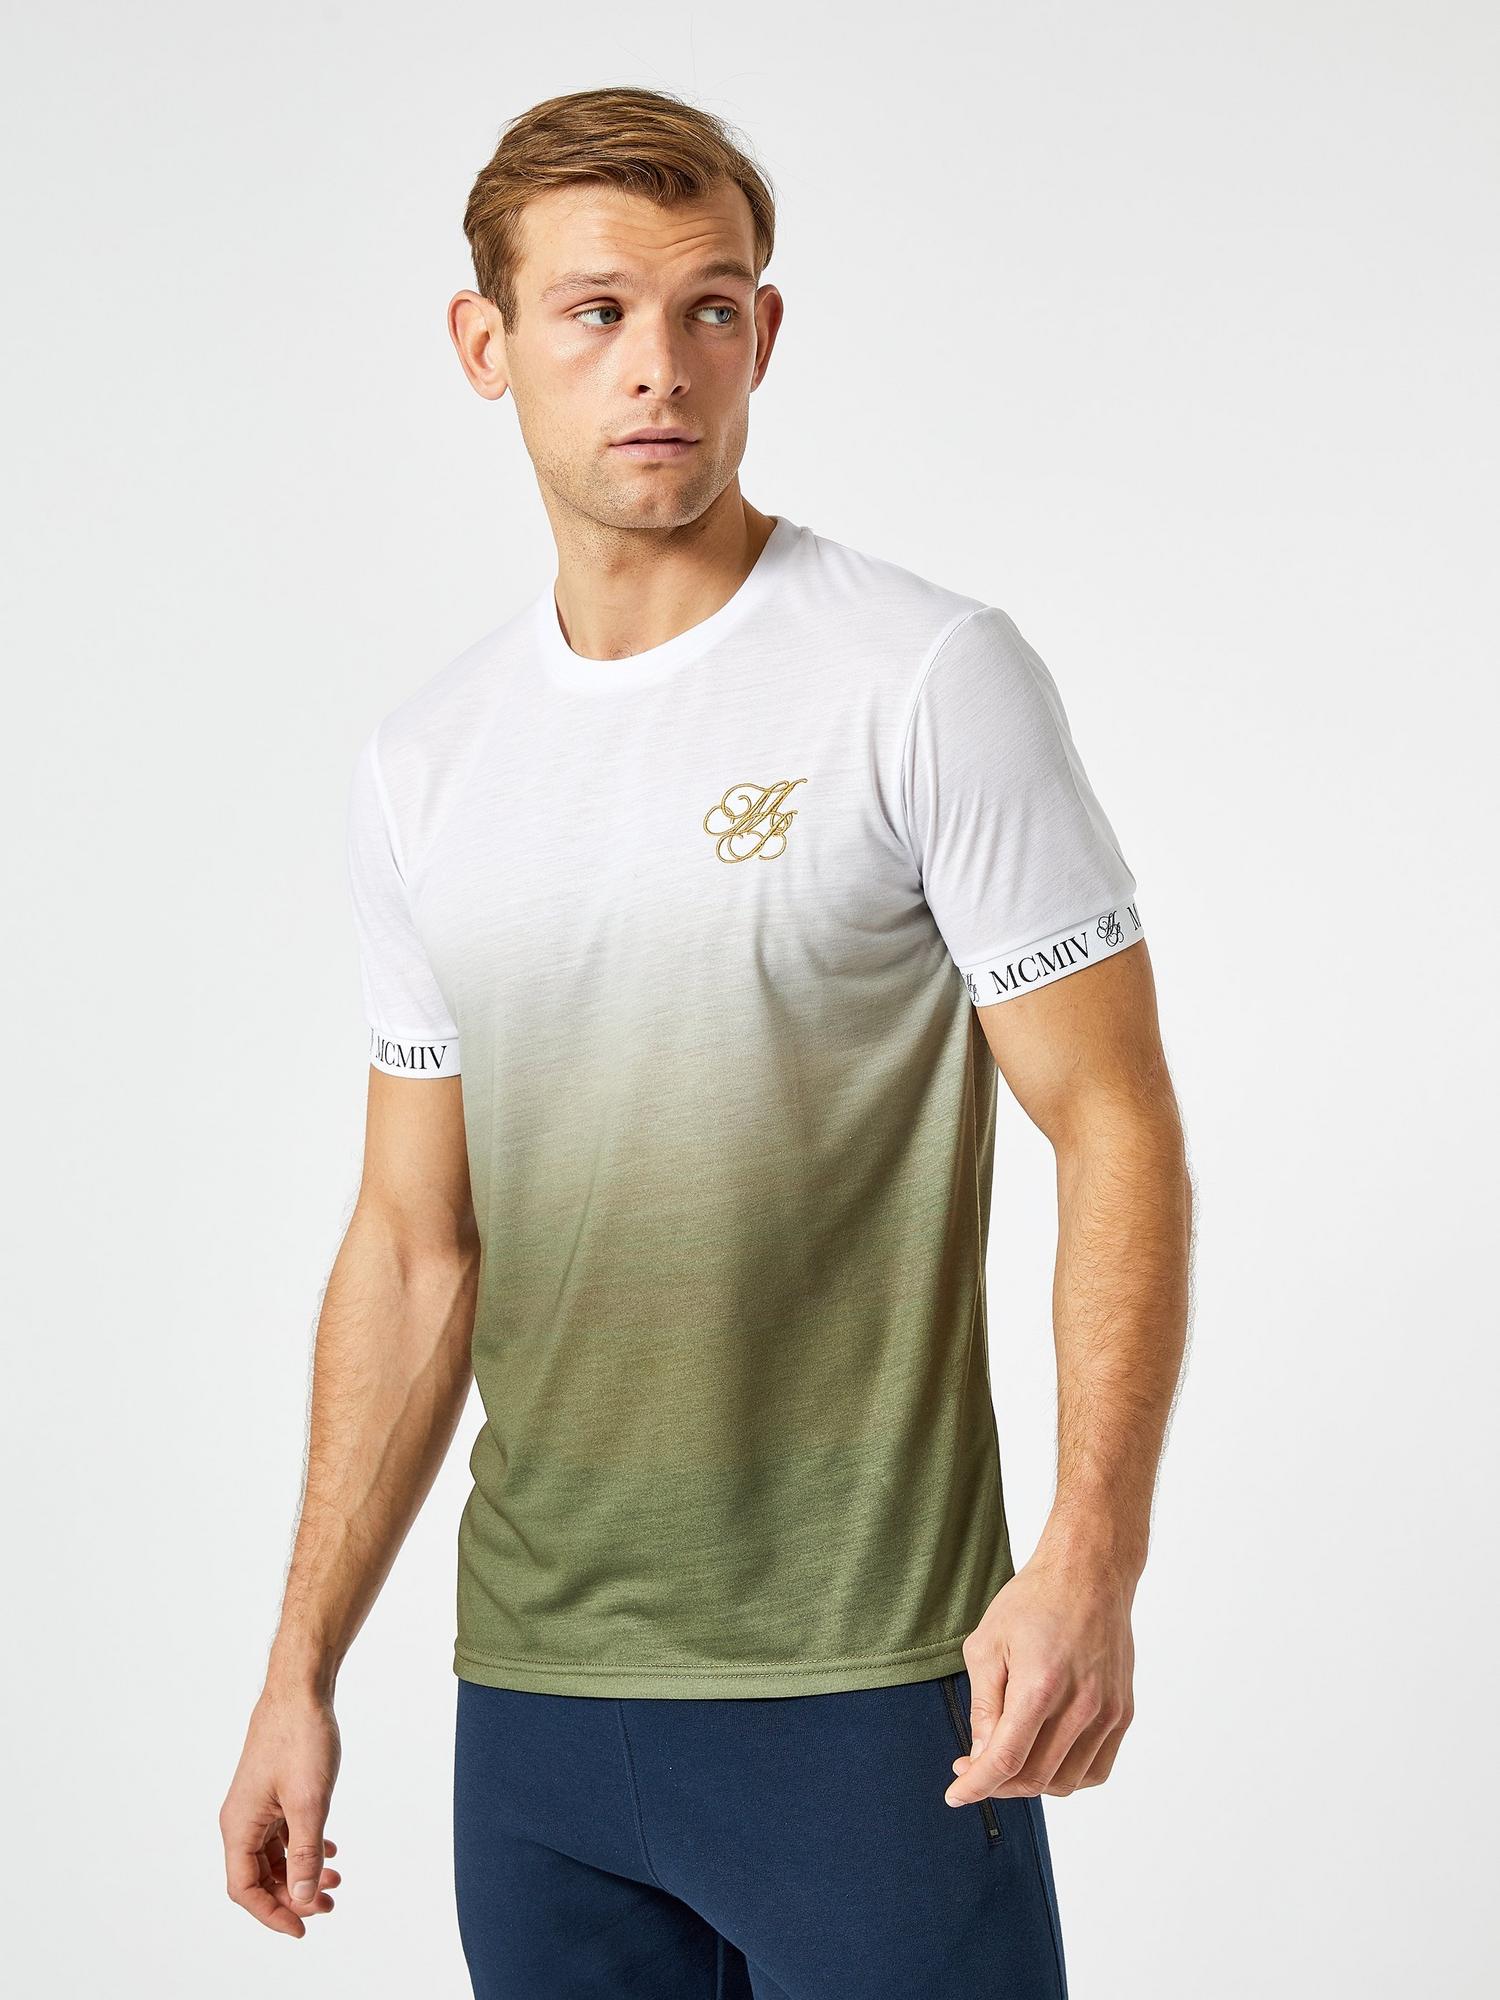 Khaki and White Ombre TShirt with MB Embroidery | Burton UK